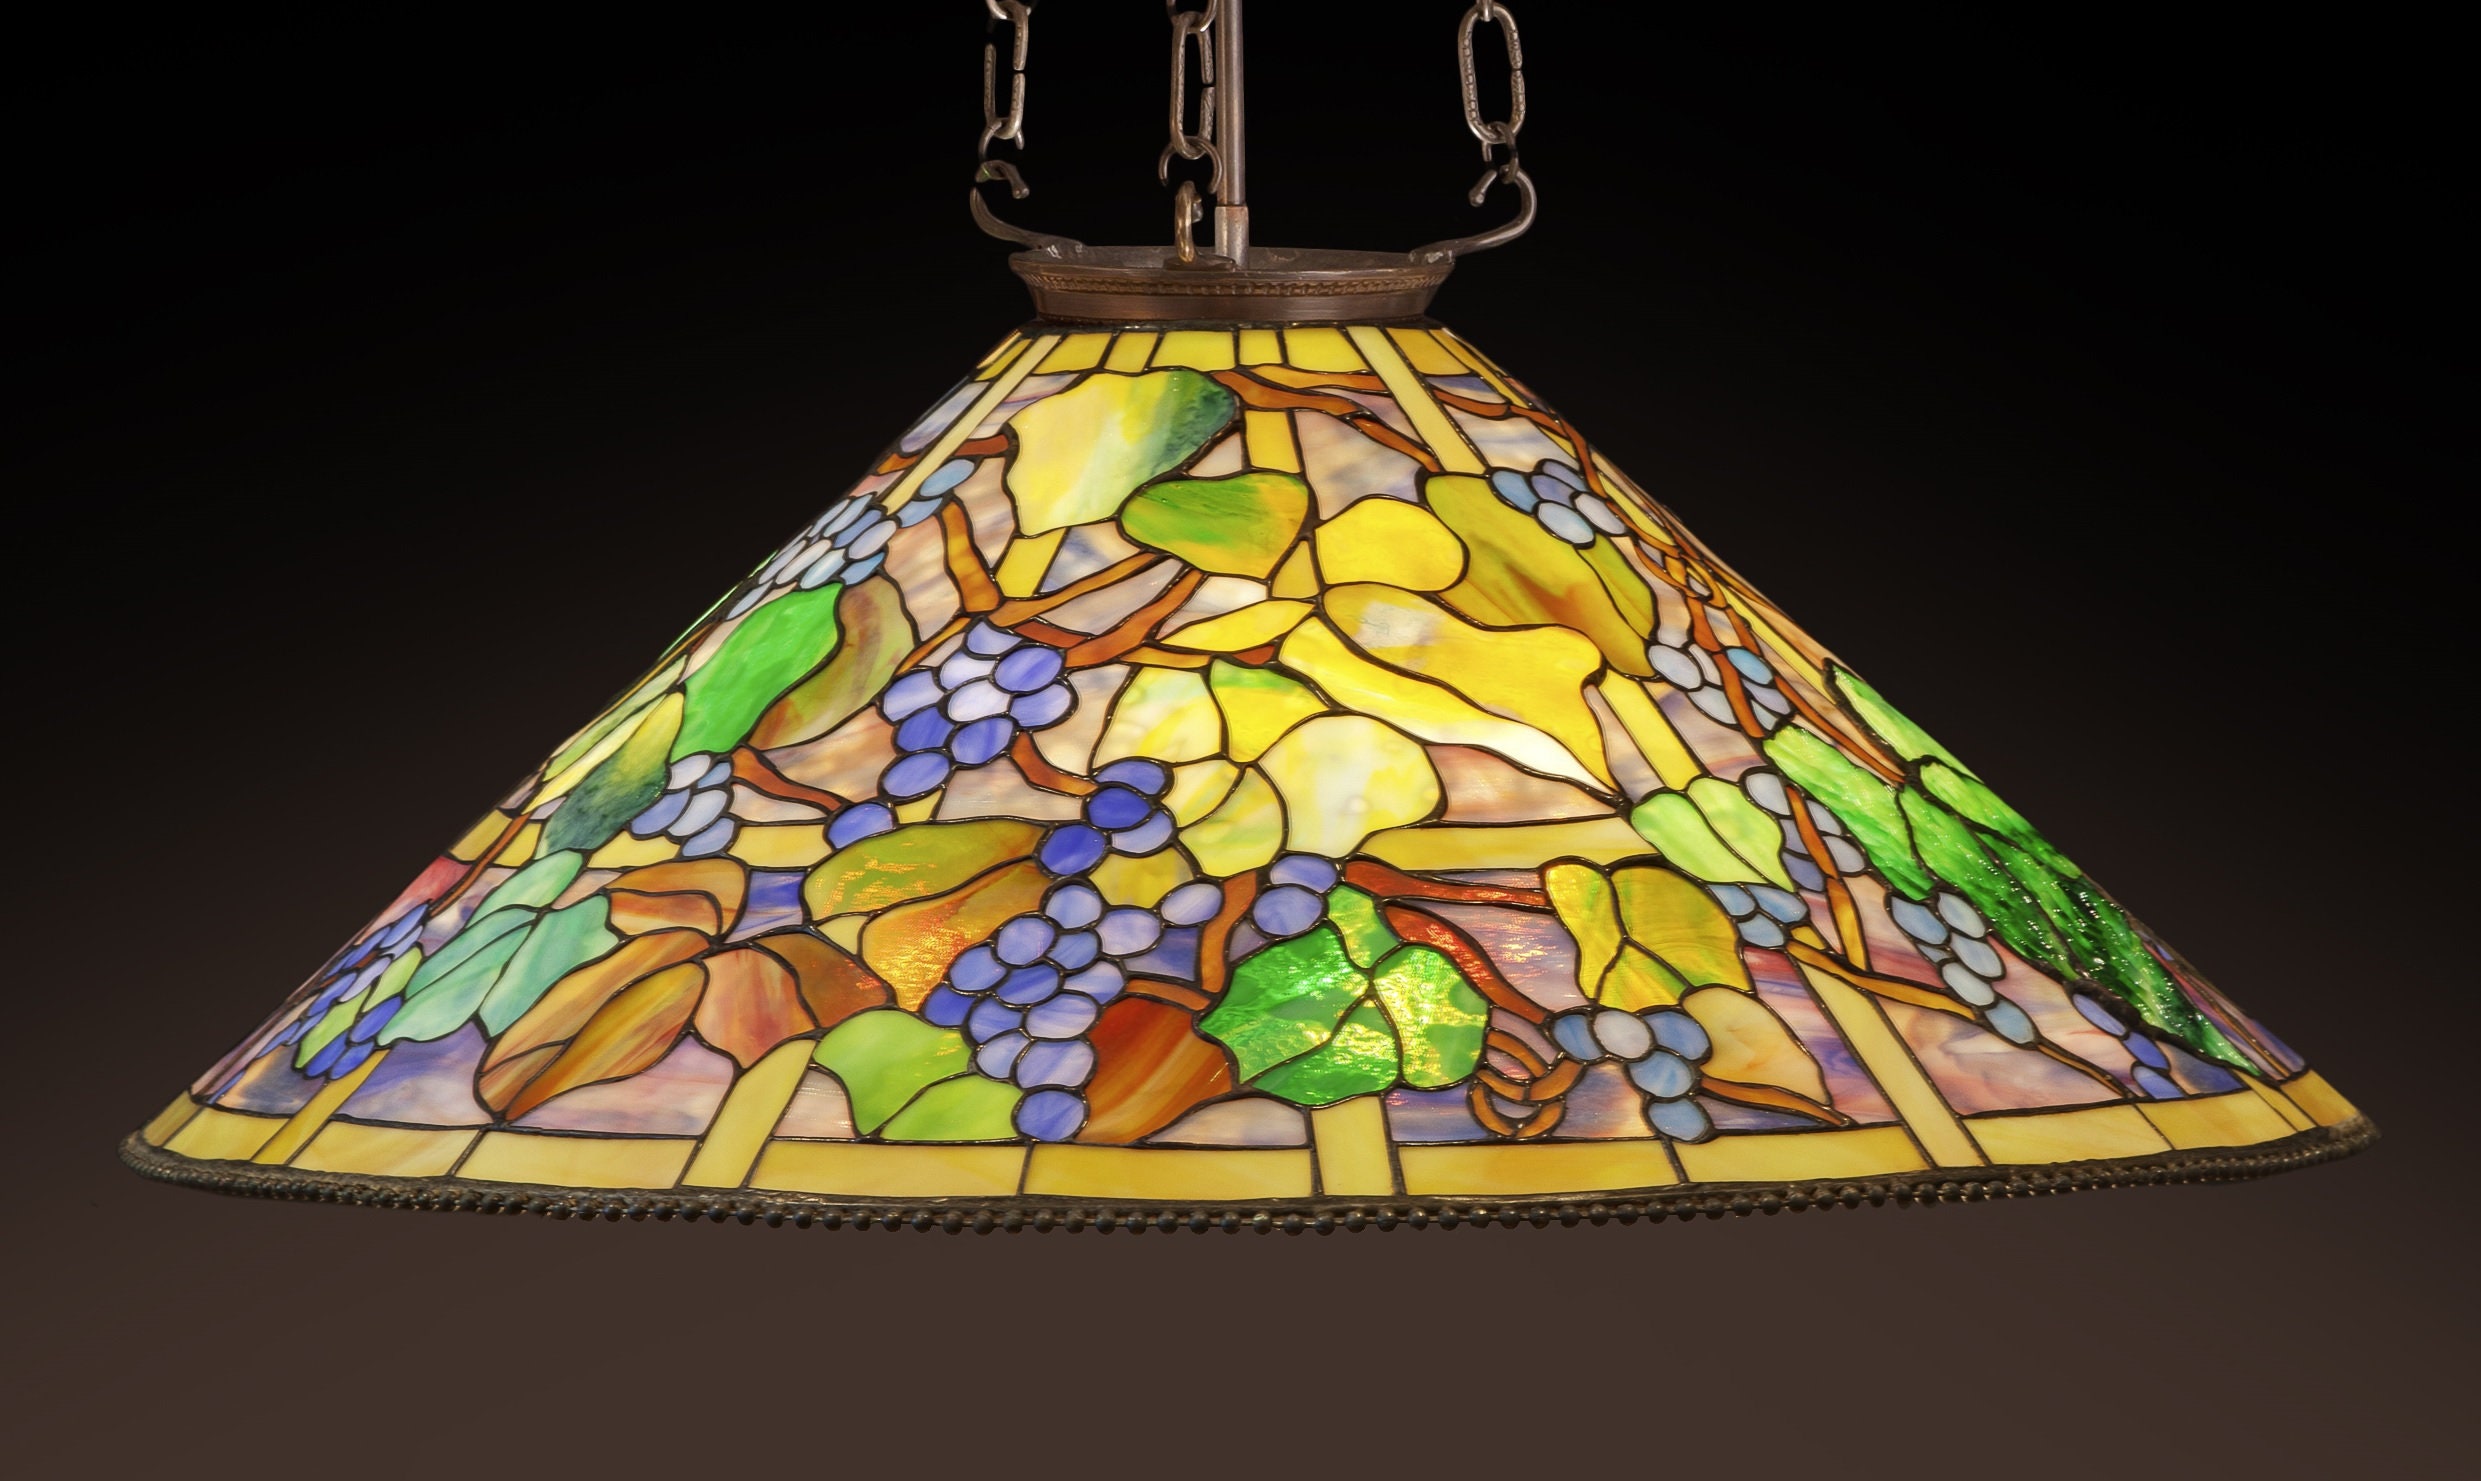  Grapes Cluster Glass Jewels for Stained Glass Project of  Crafting Tiffany Style Window Hangings Lampshades (35x41mm, Colored Glaze)  : Arts, Crafts & Sewing